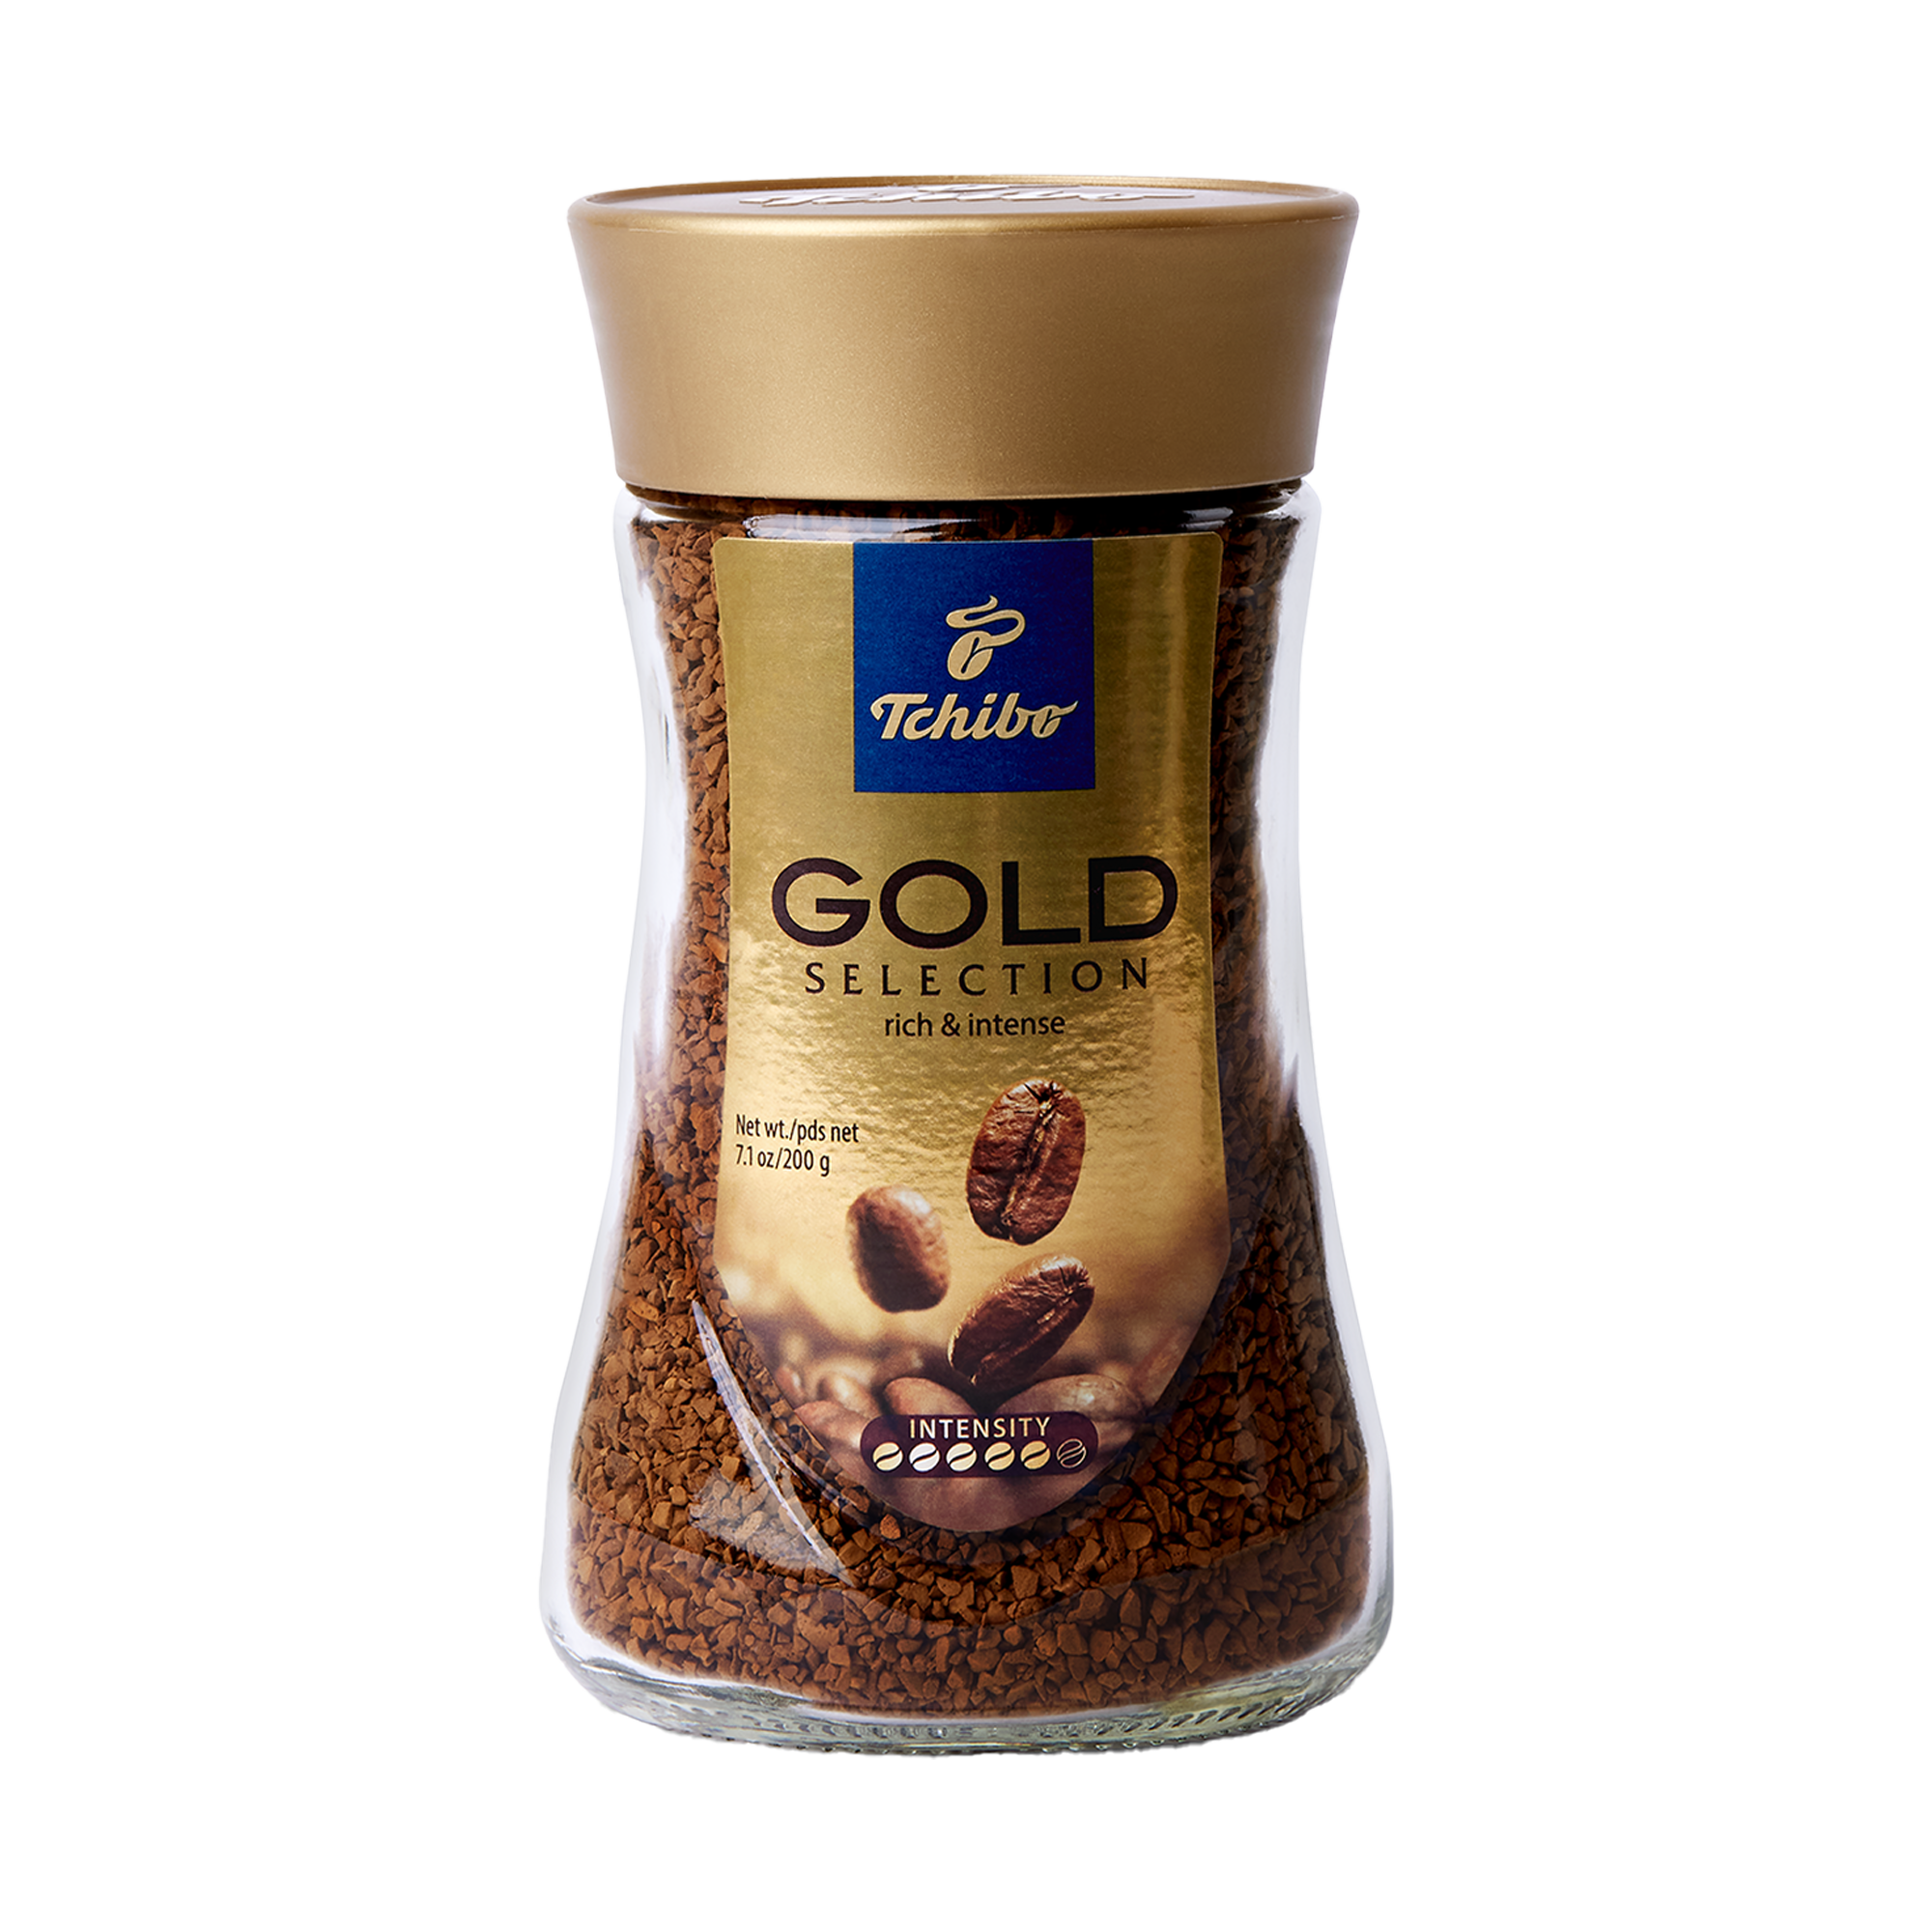 Gold Selection Instant 7.1oz (Subscription)